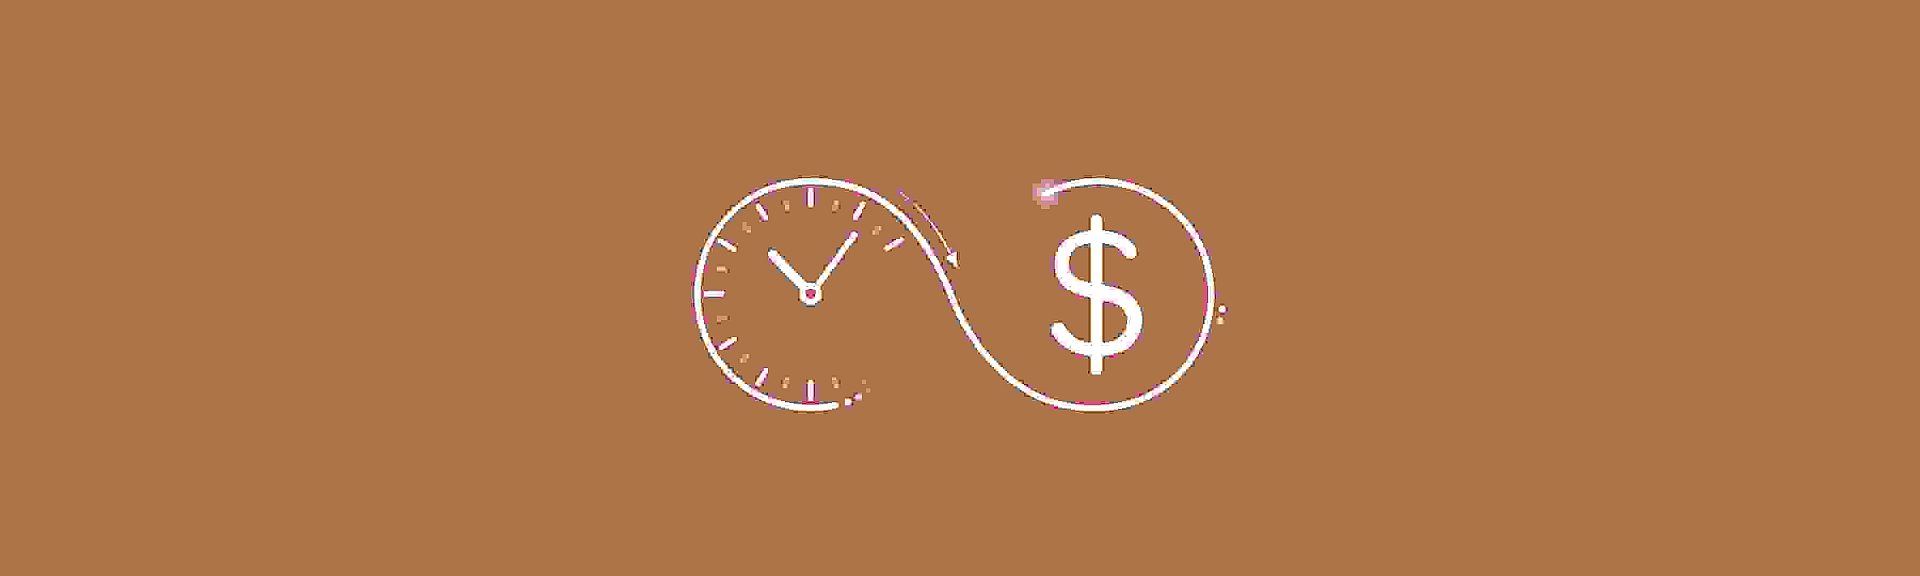 A graphic illustration of a clock and a dollar sign in an infinity sign - it symbolises time and money.